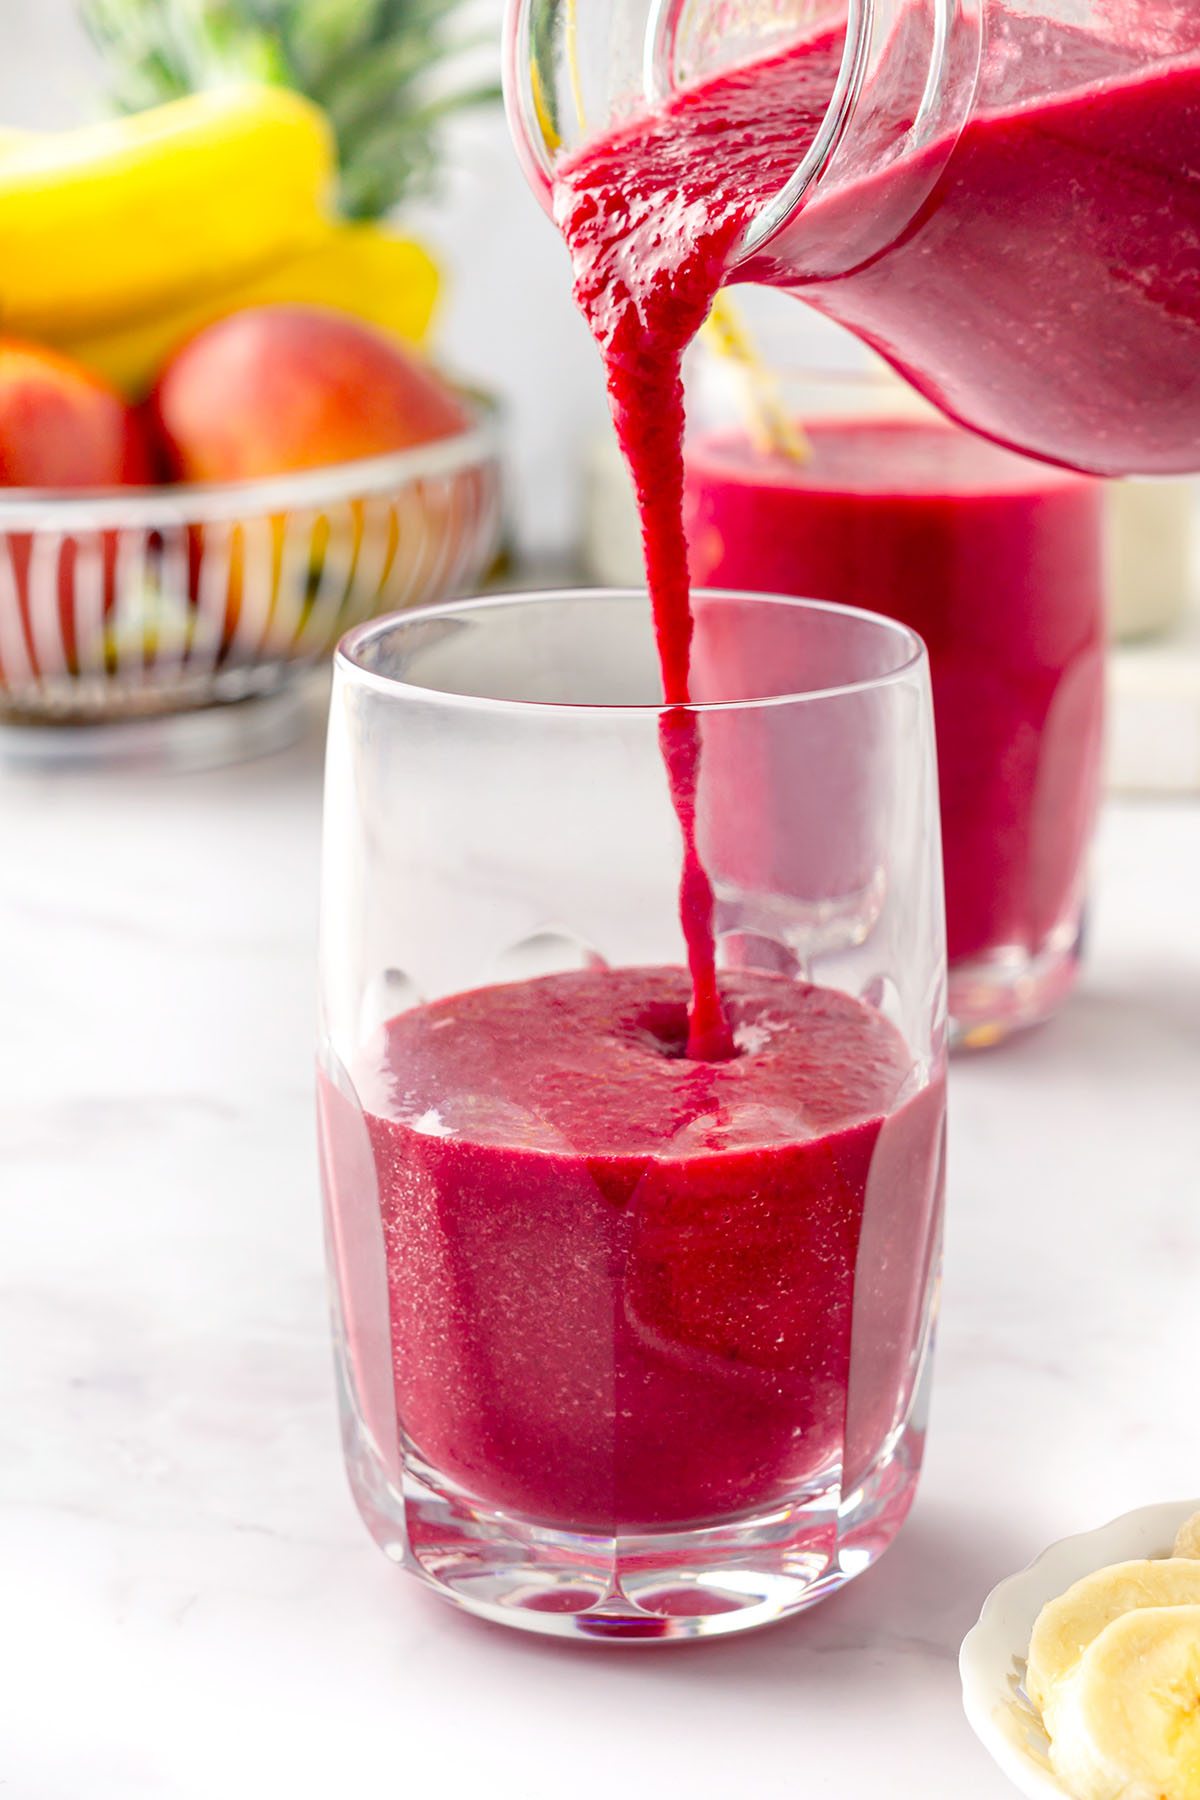 Pouring beet pineapple smoothie in a glass